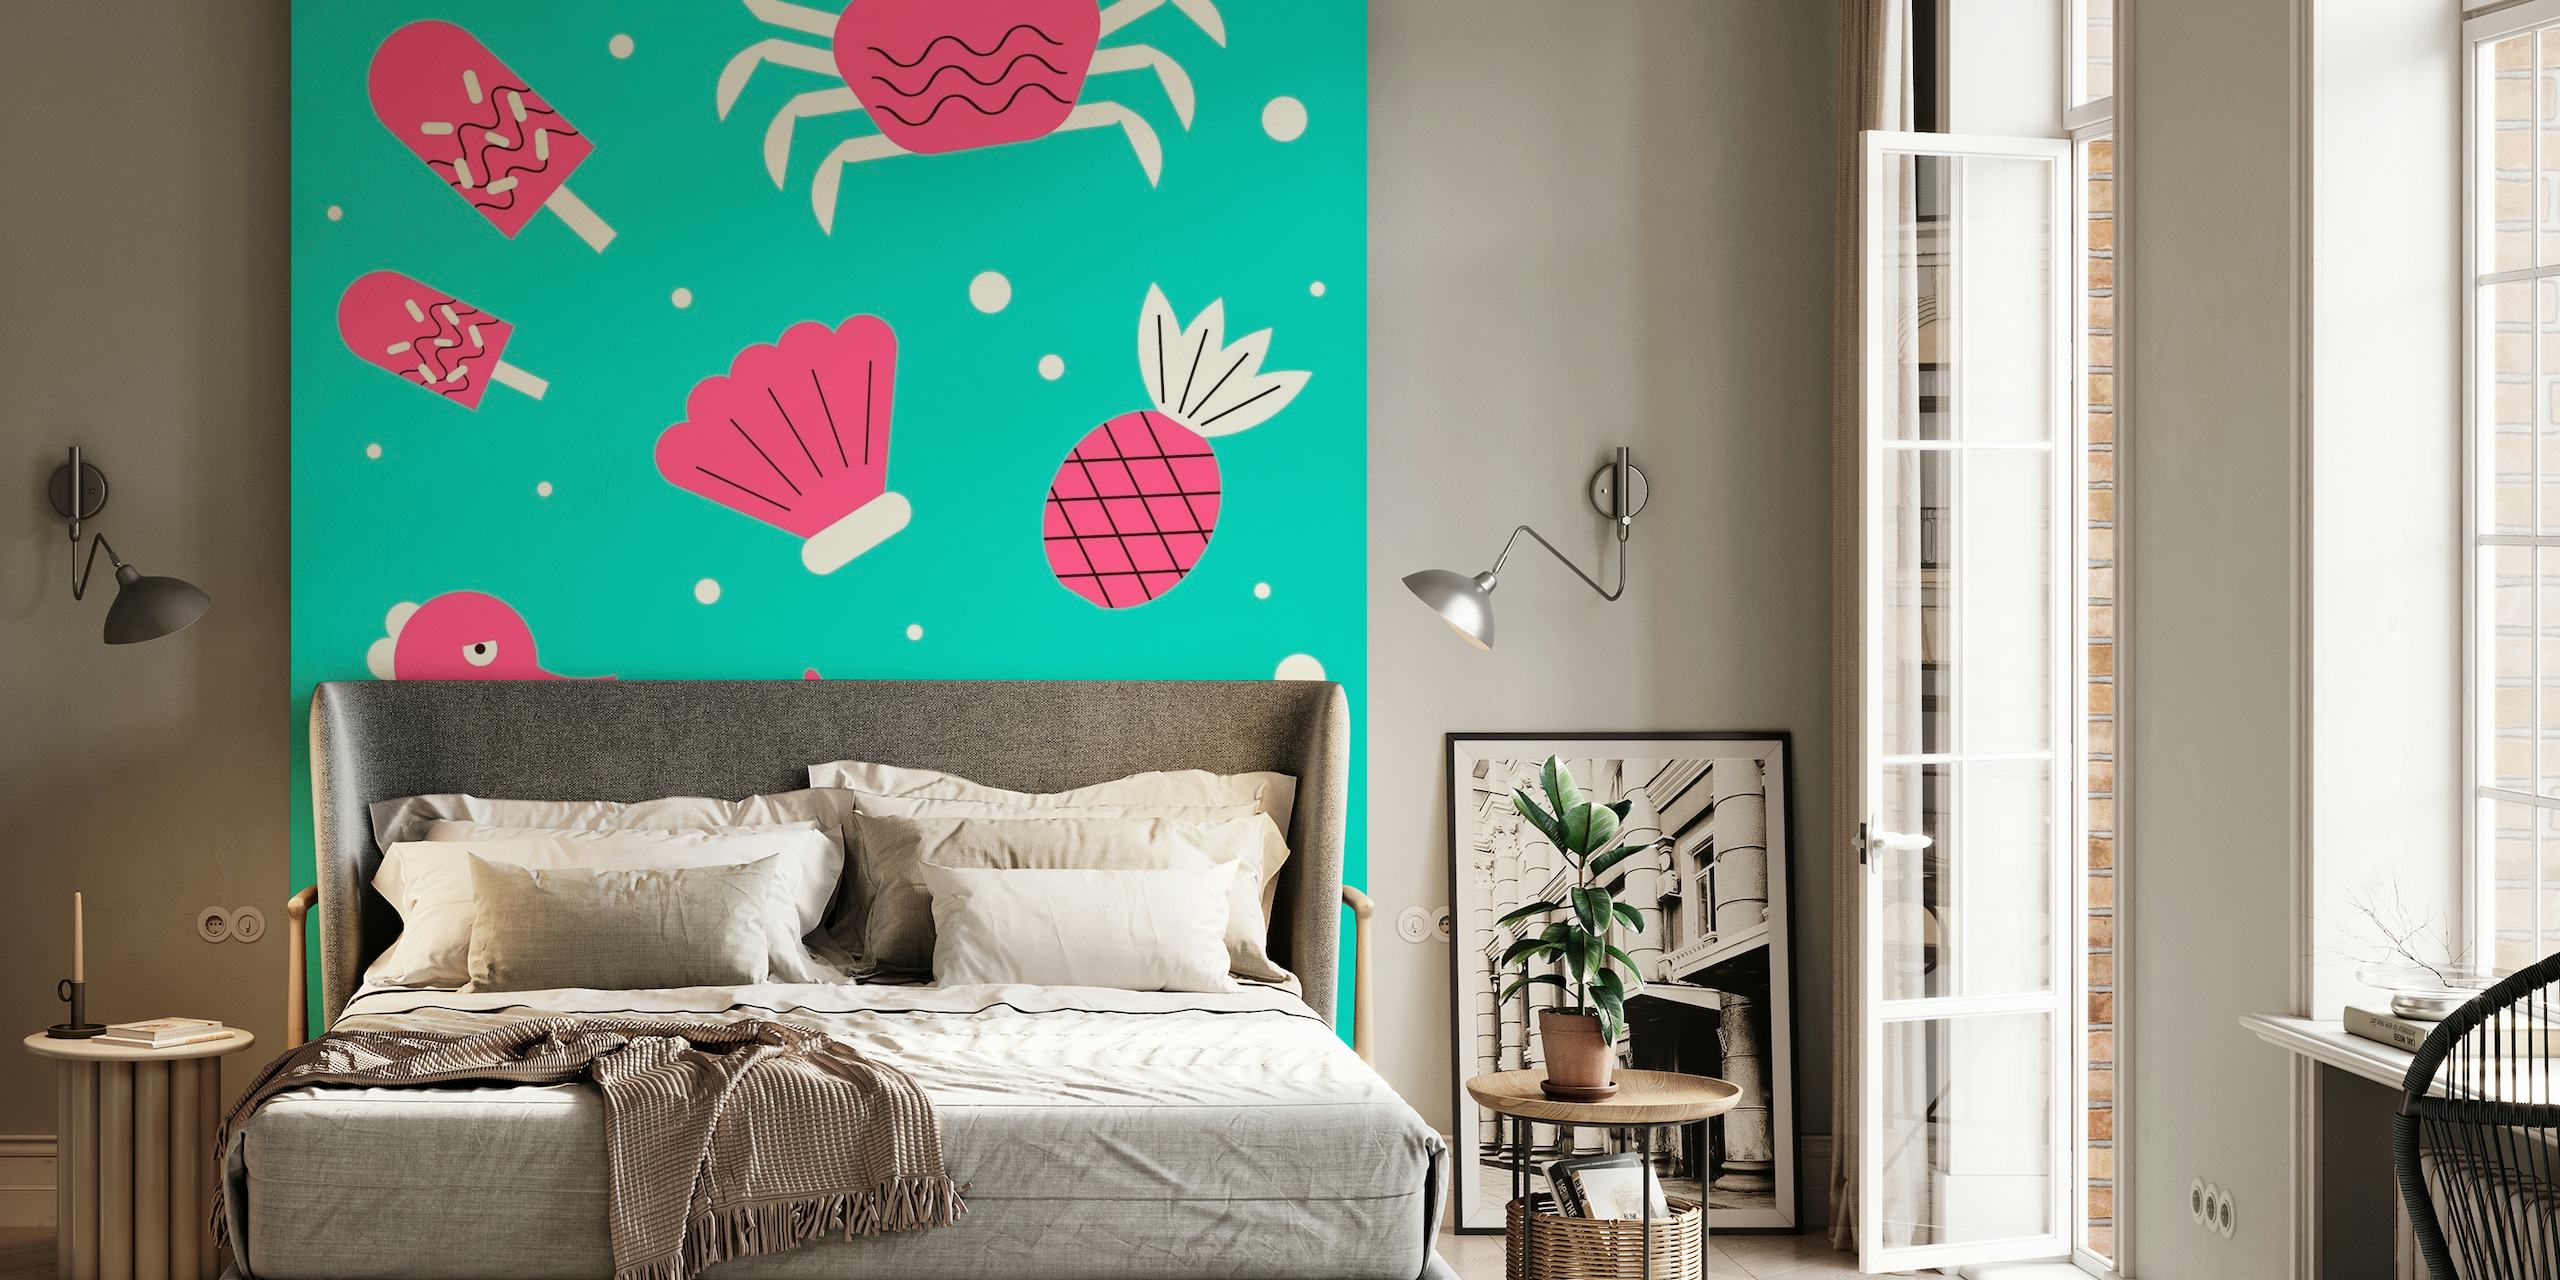 Miami Summer wall mural with cartoon flamingo, crab, pineapple, and other summer icons on aqua background